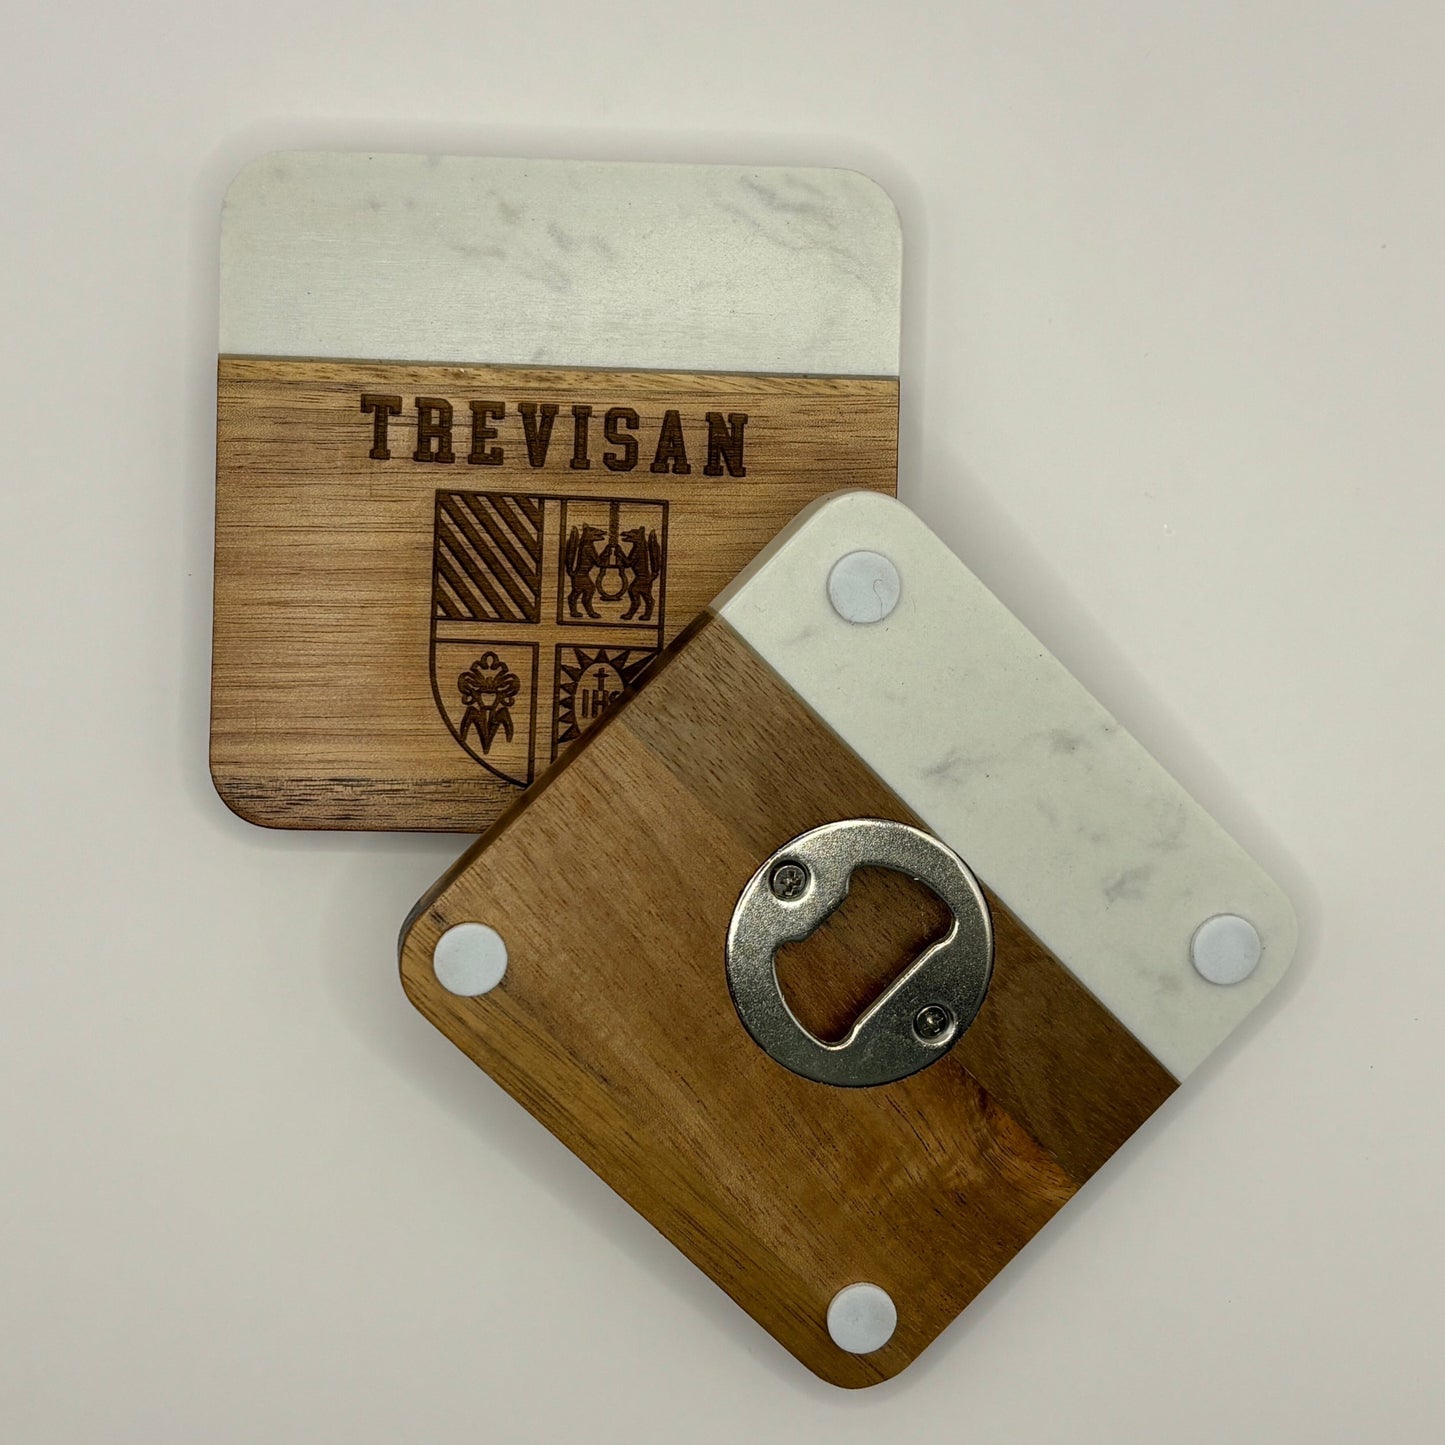 Marble & Wooden Square Bottle Opener Coasters (SET OF 4)